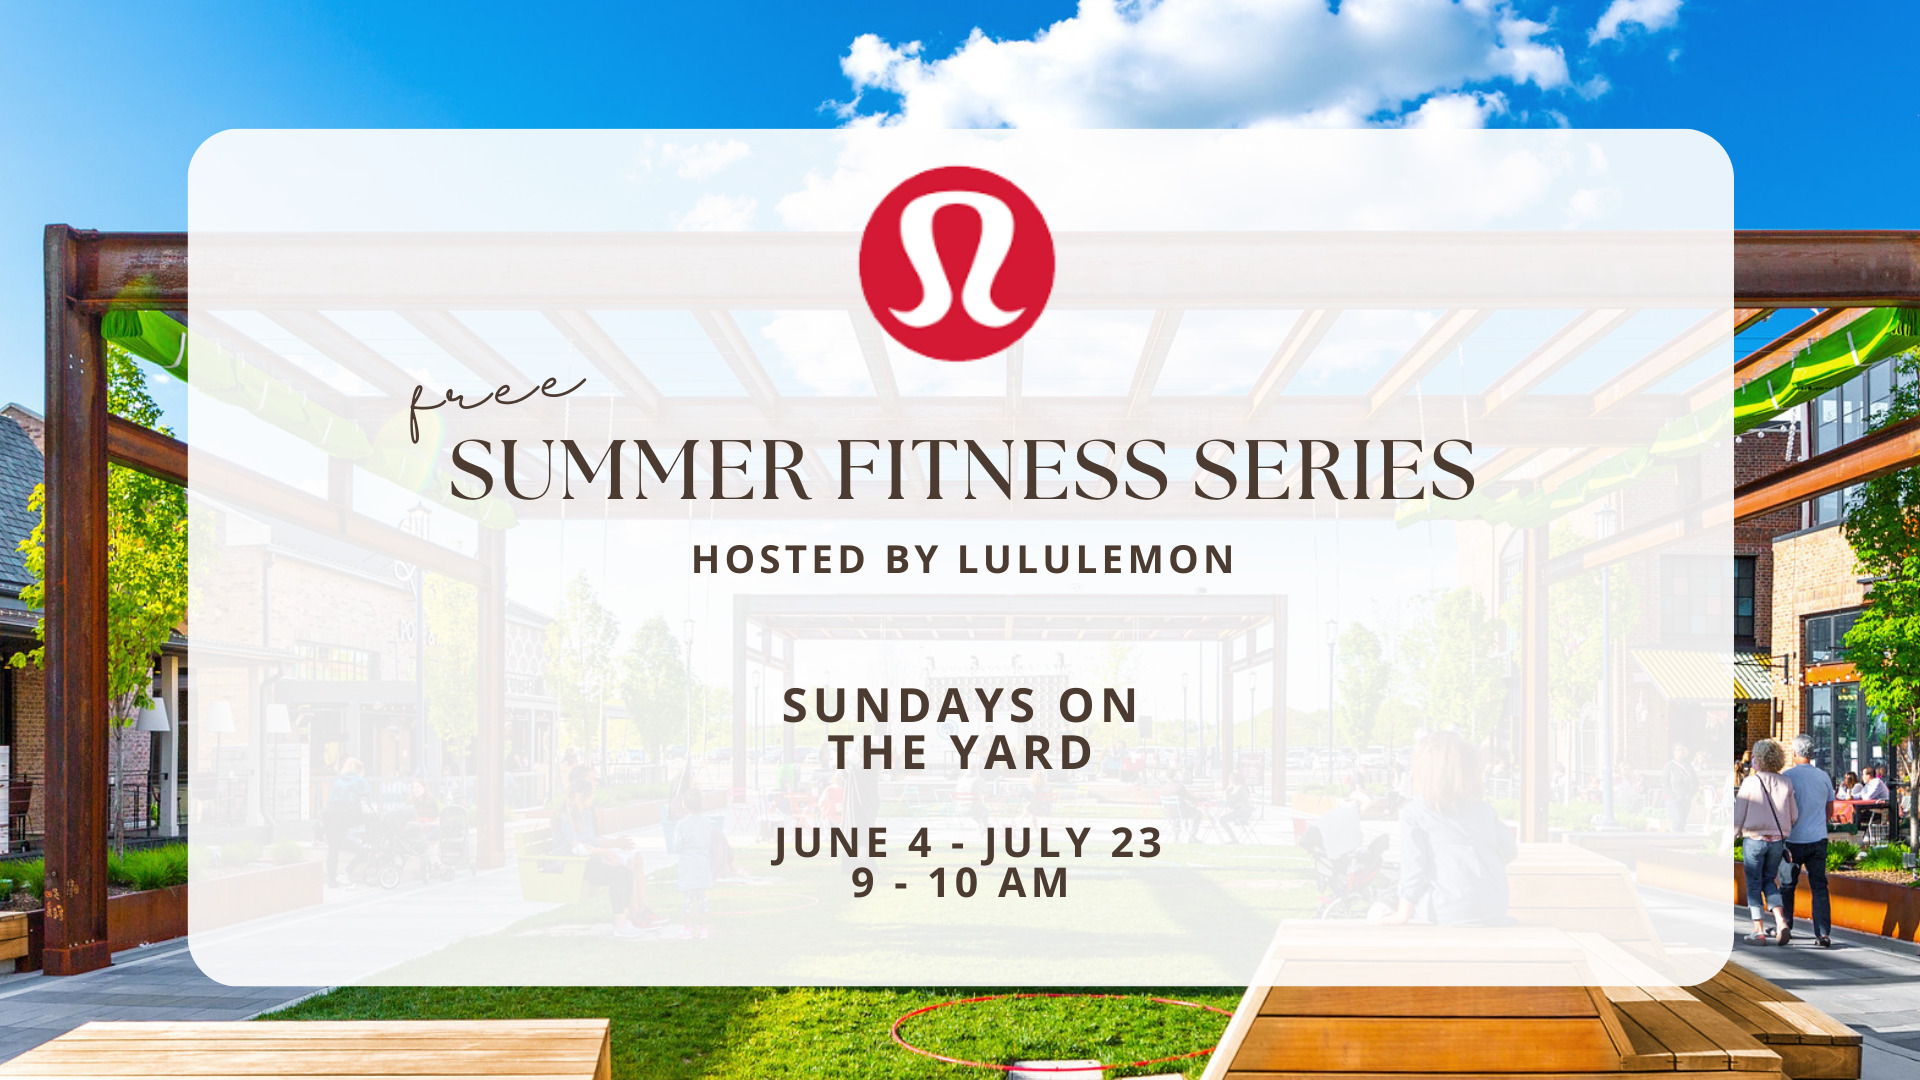 free summer fitness series hosted by lululemon sundays on the yard june 4 - july 23 9-10am